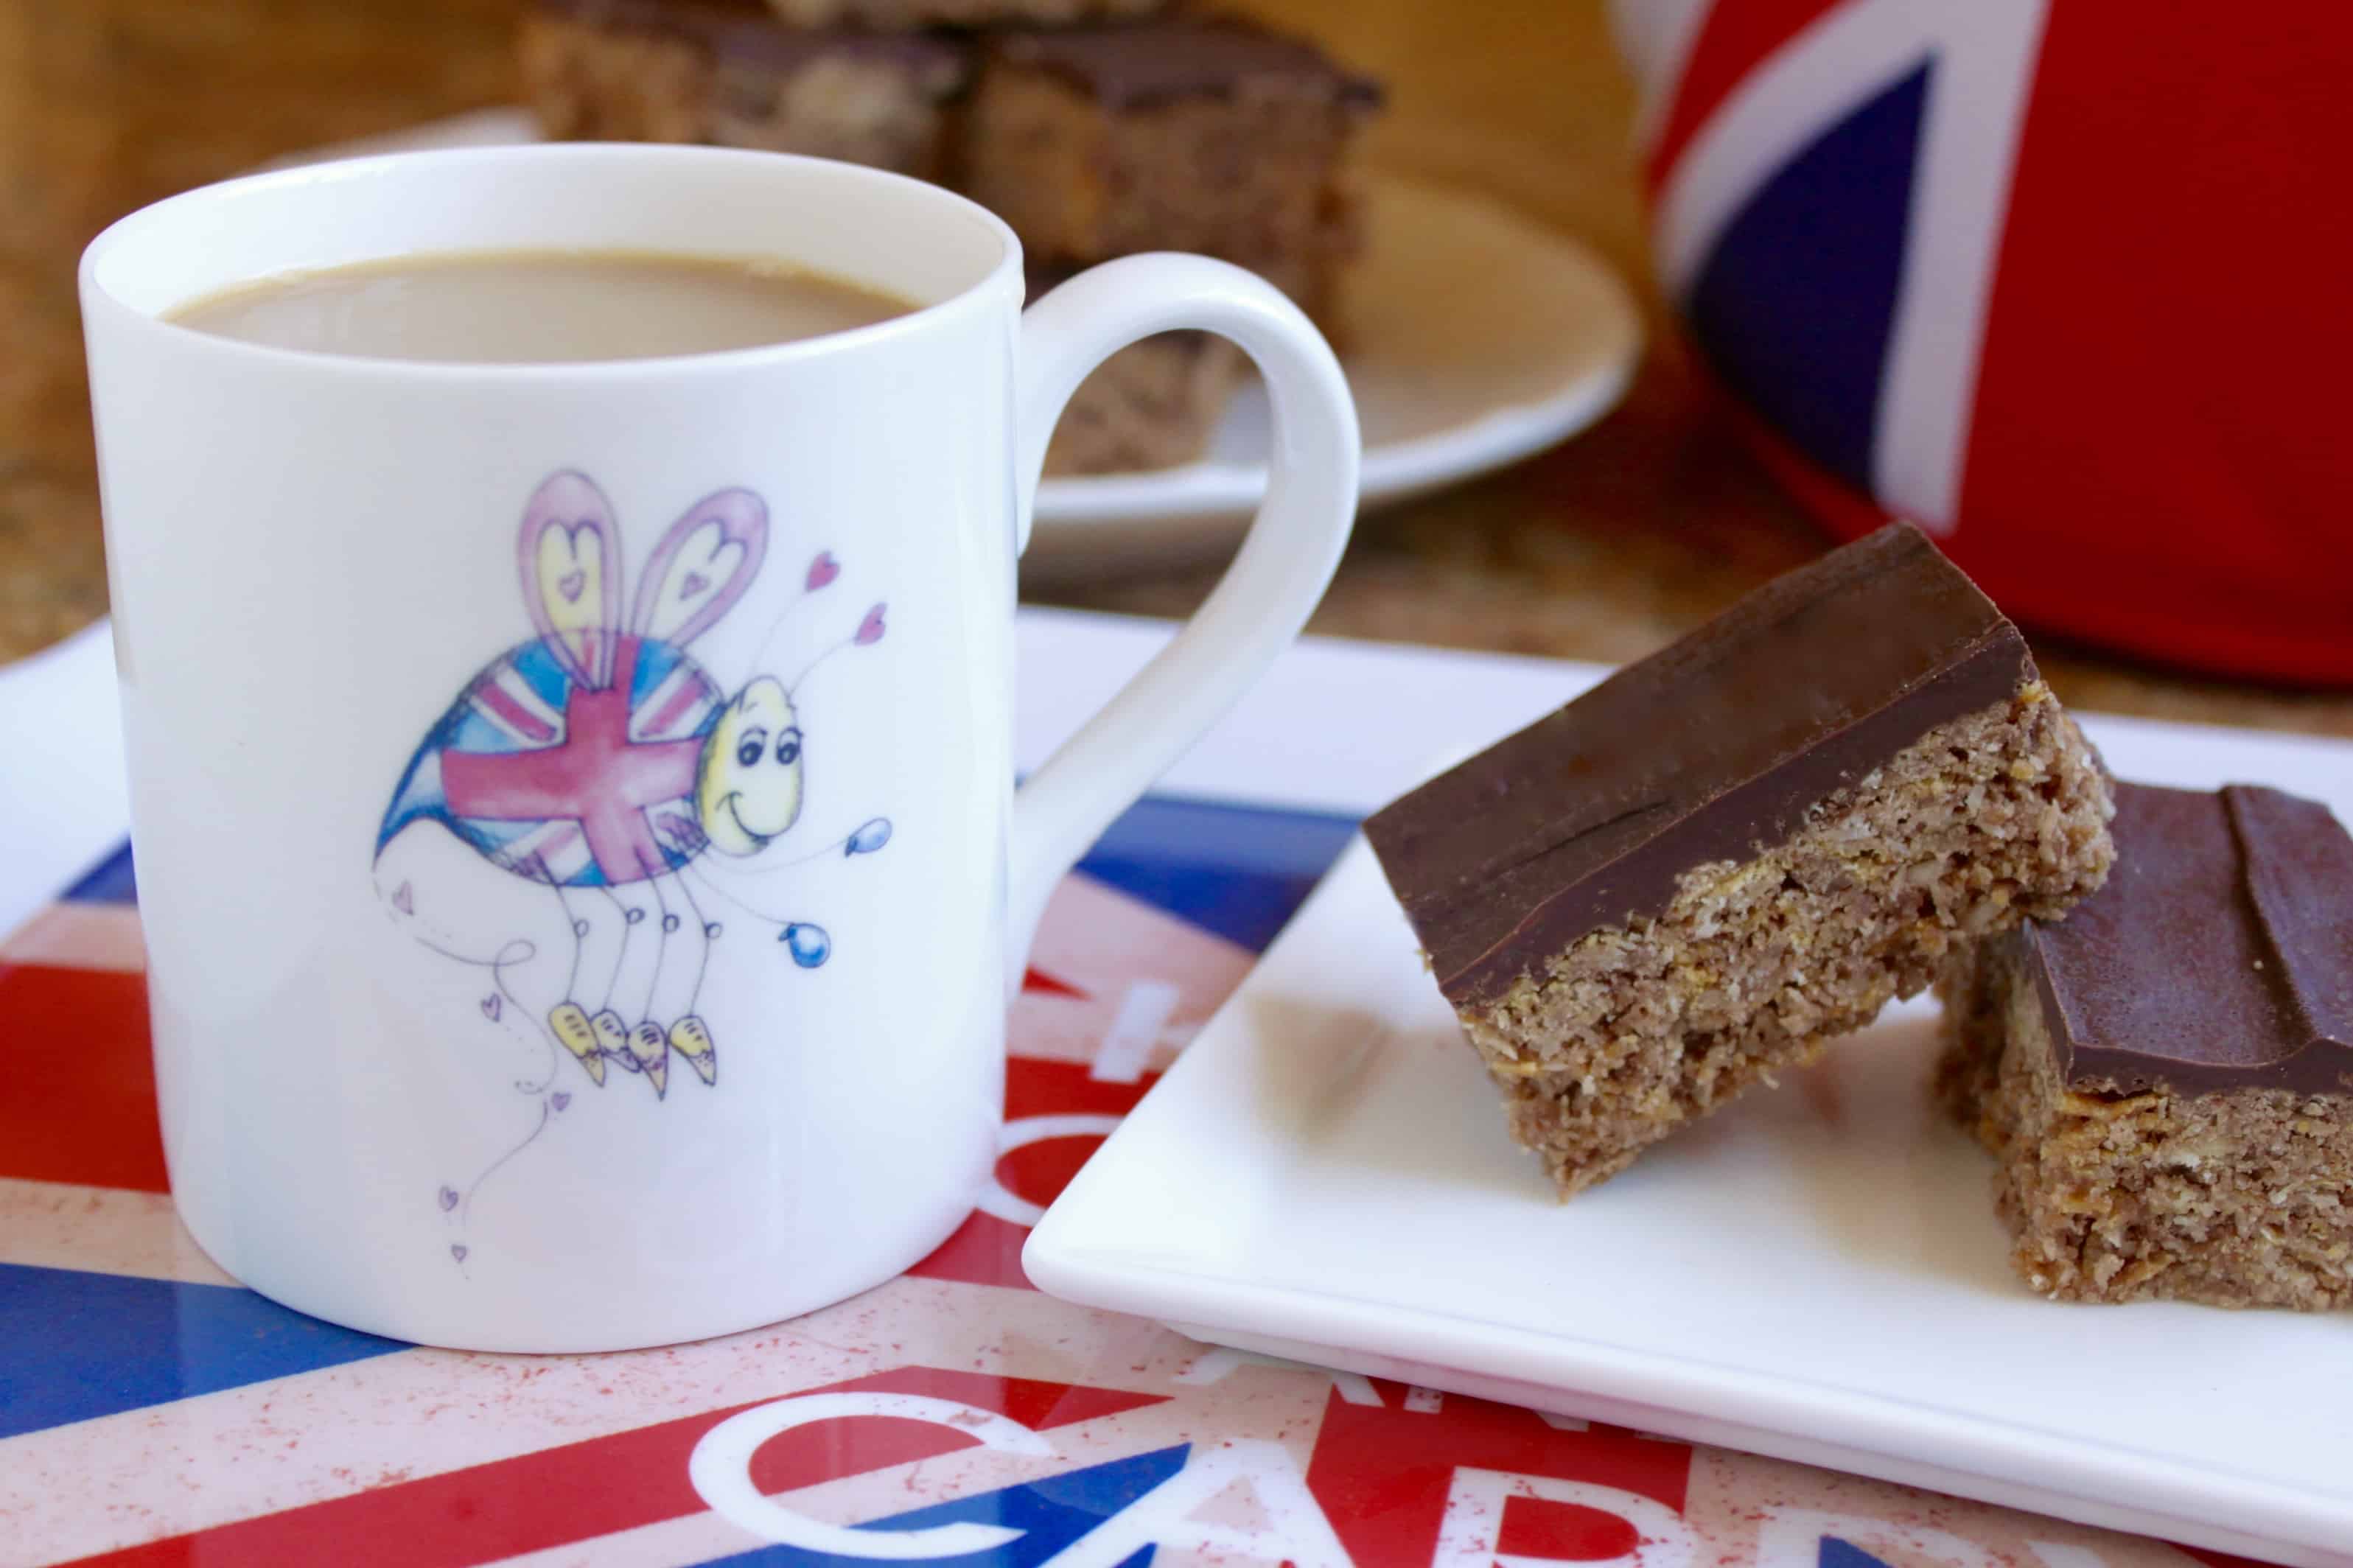 Australian Crunch bars with a cup of tea on a Union Jack tray